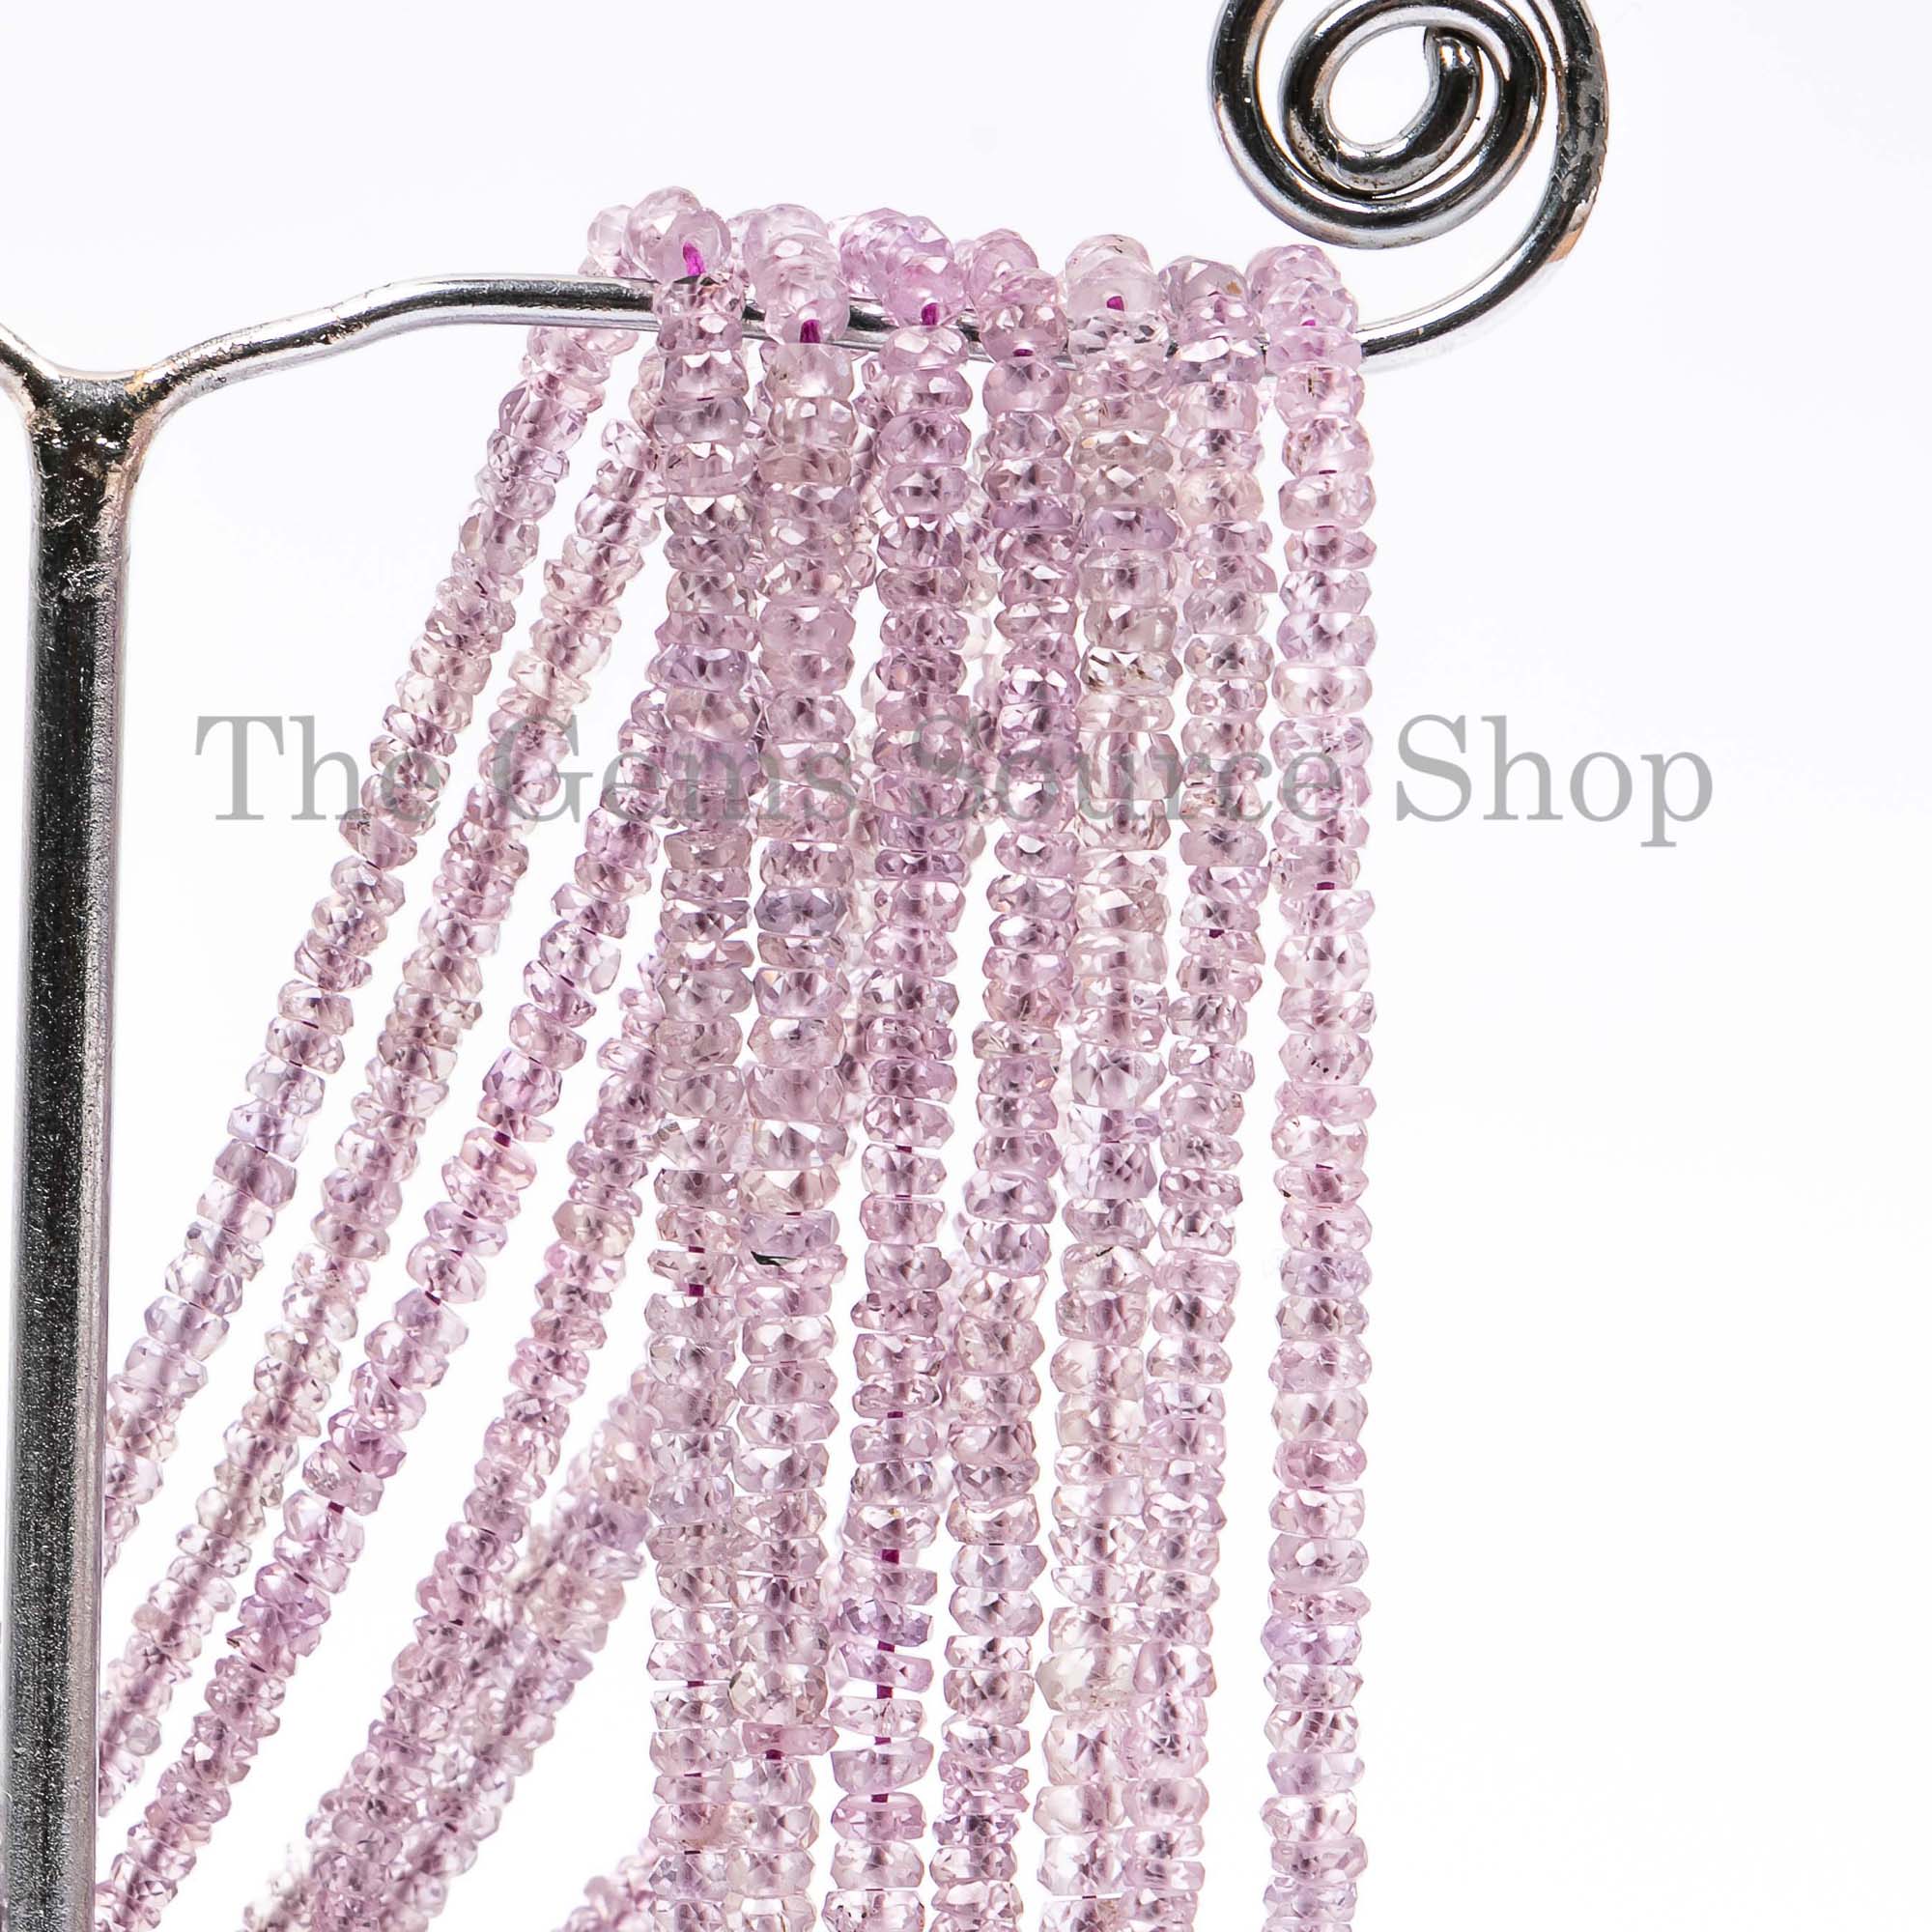 Lavender sapphire Faceted rondelle shape gemstone beads TGS-2572